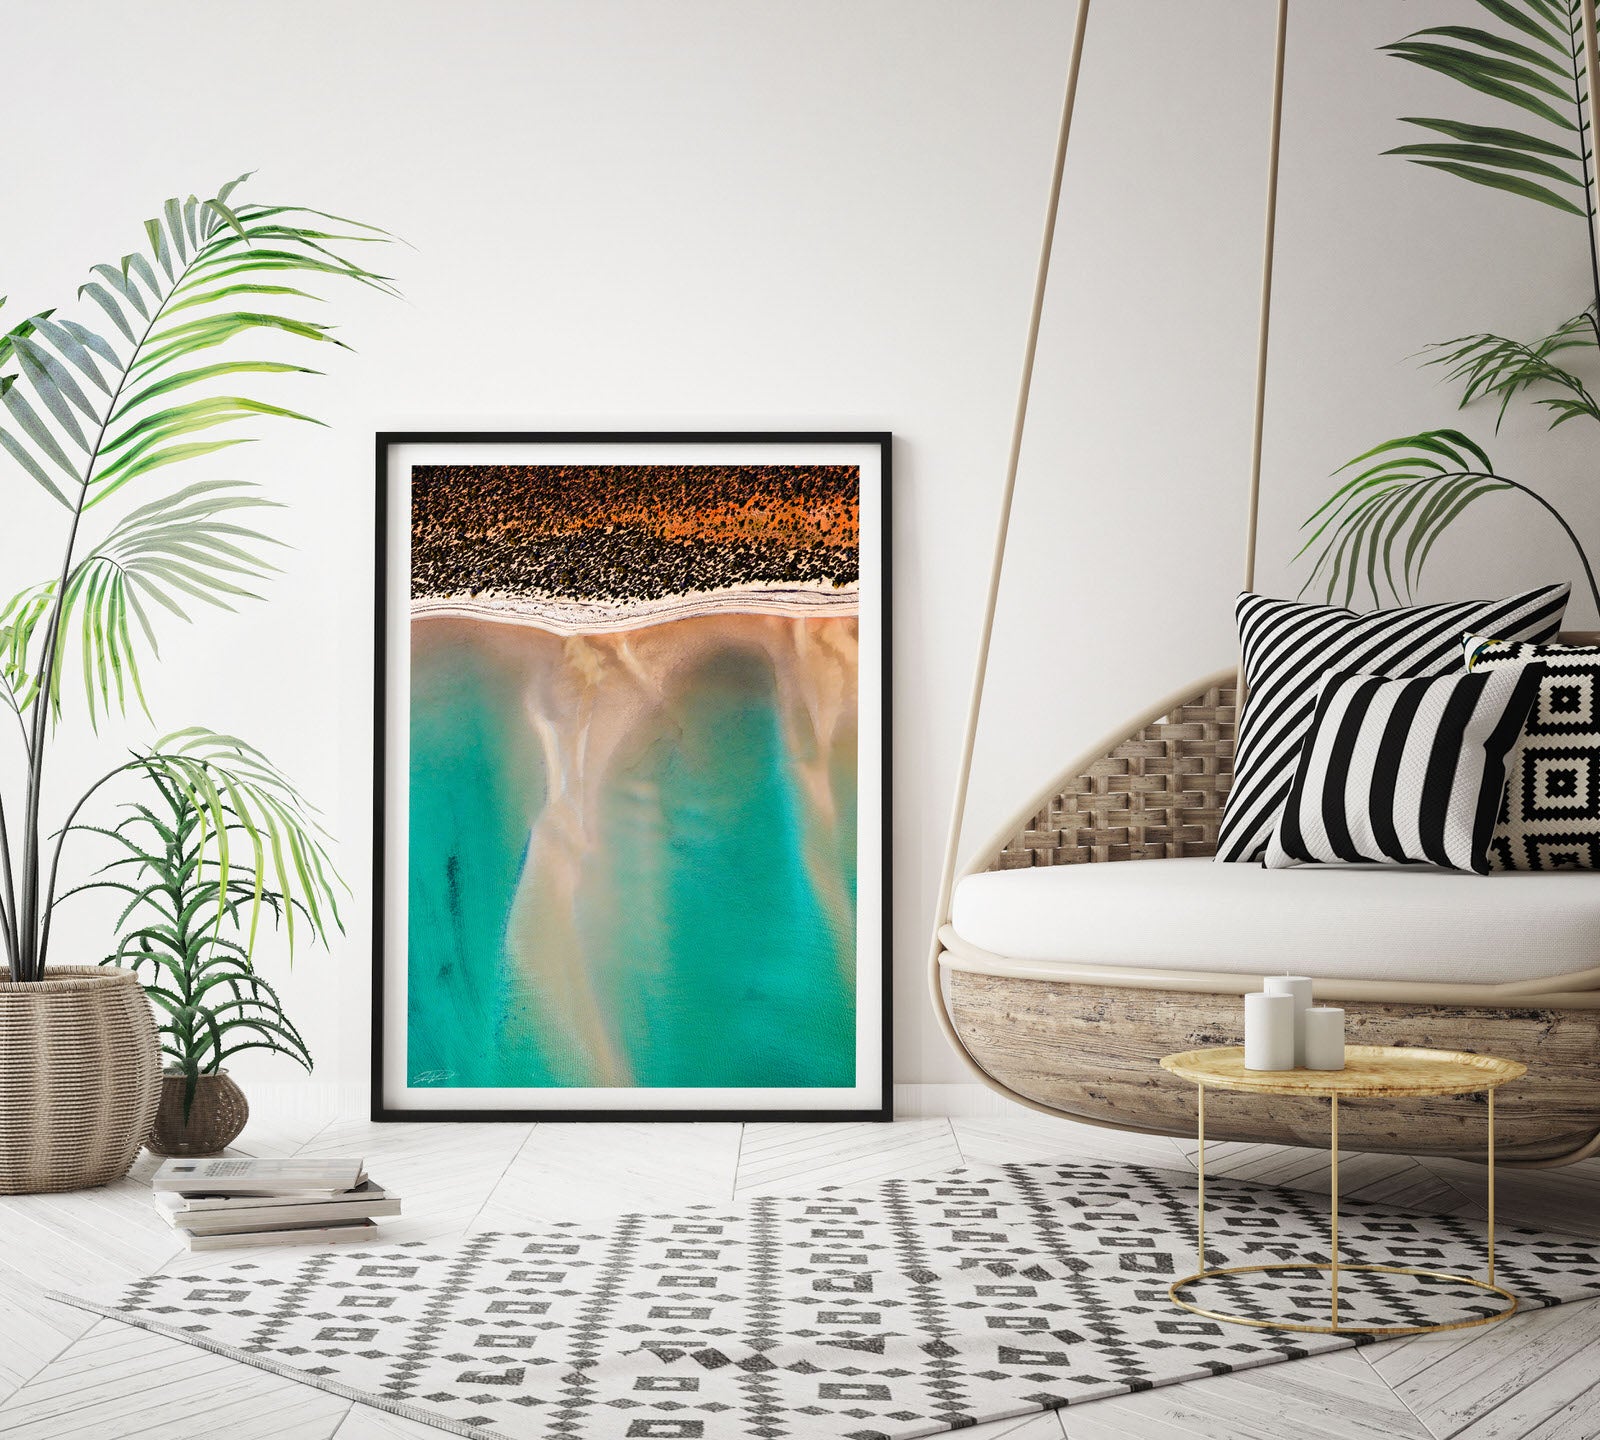 Framed abstract print with rug and palm tree styling